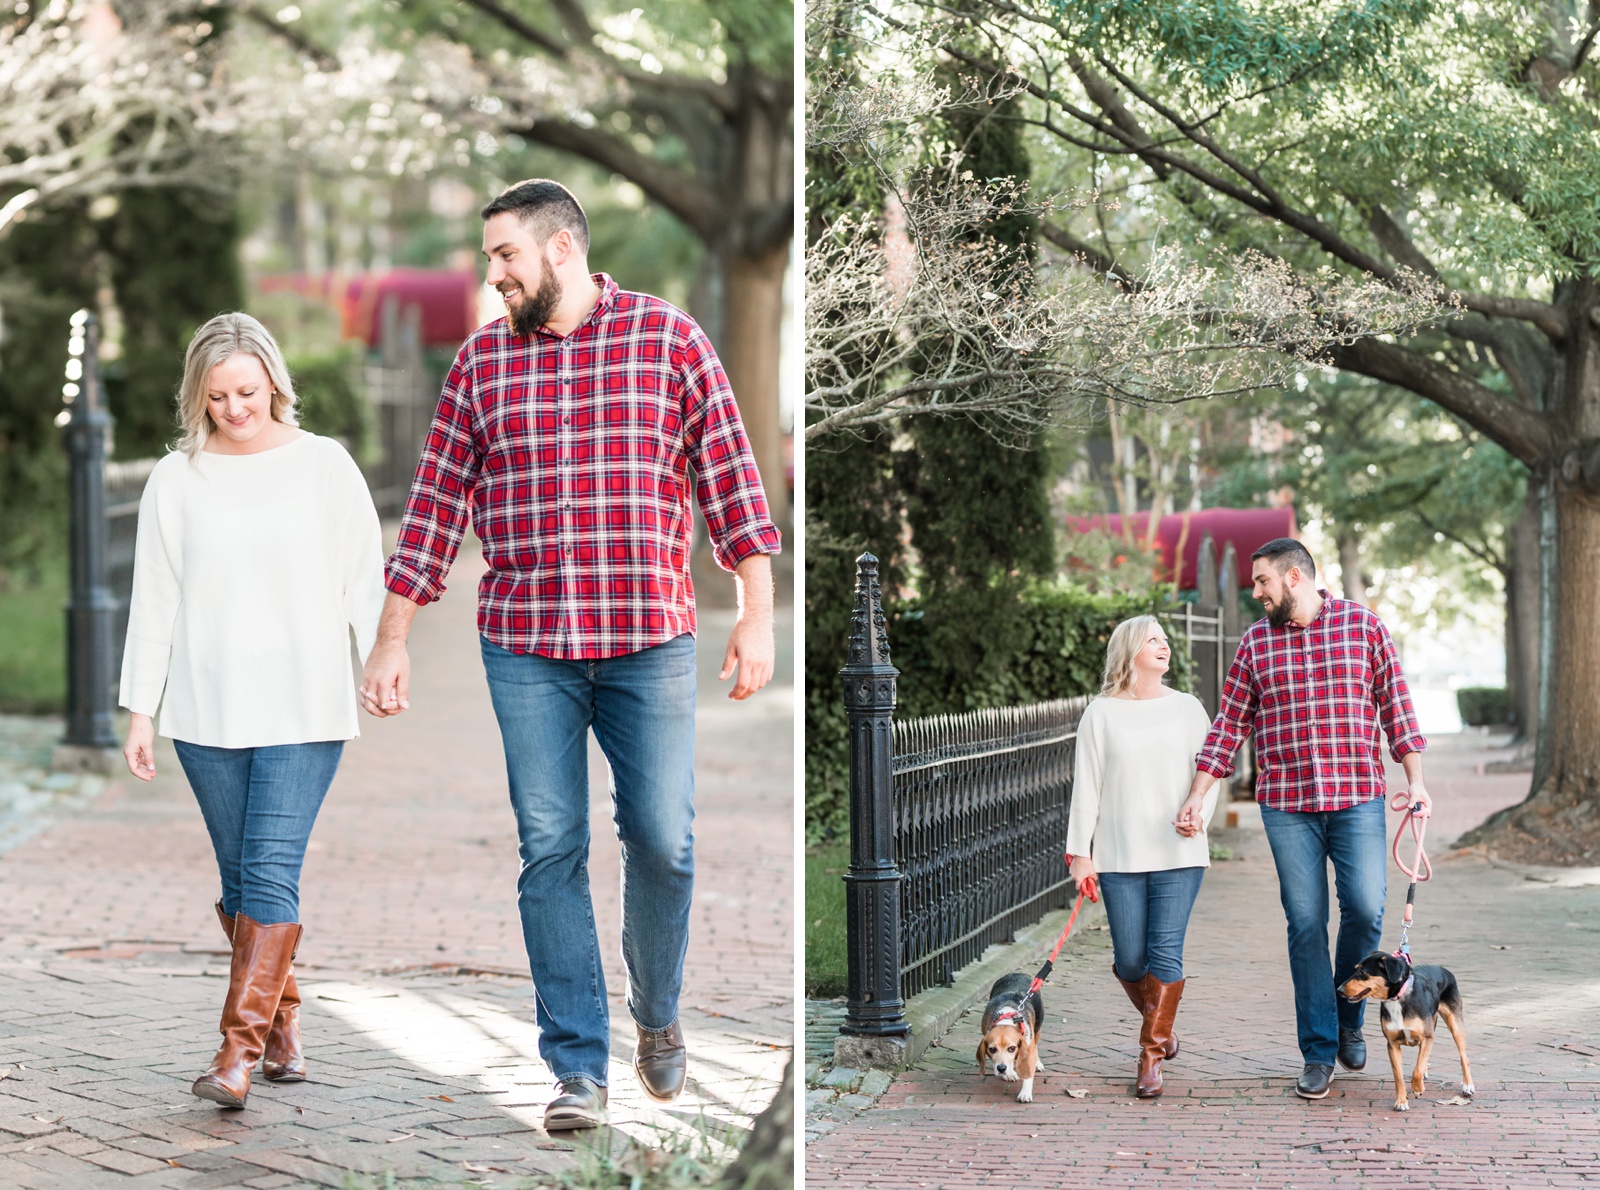 downtown-norfolk-virginia-fall-engagement-session-photo_2305.jpg